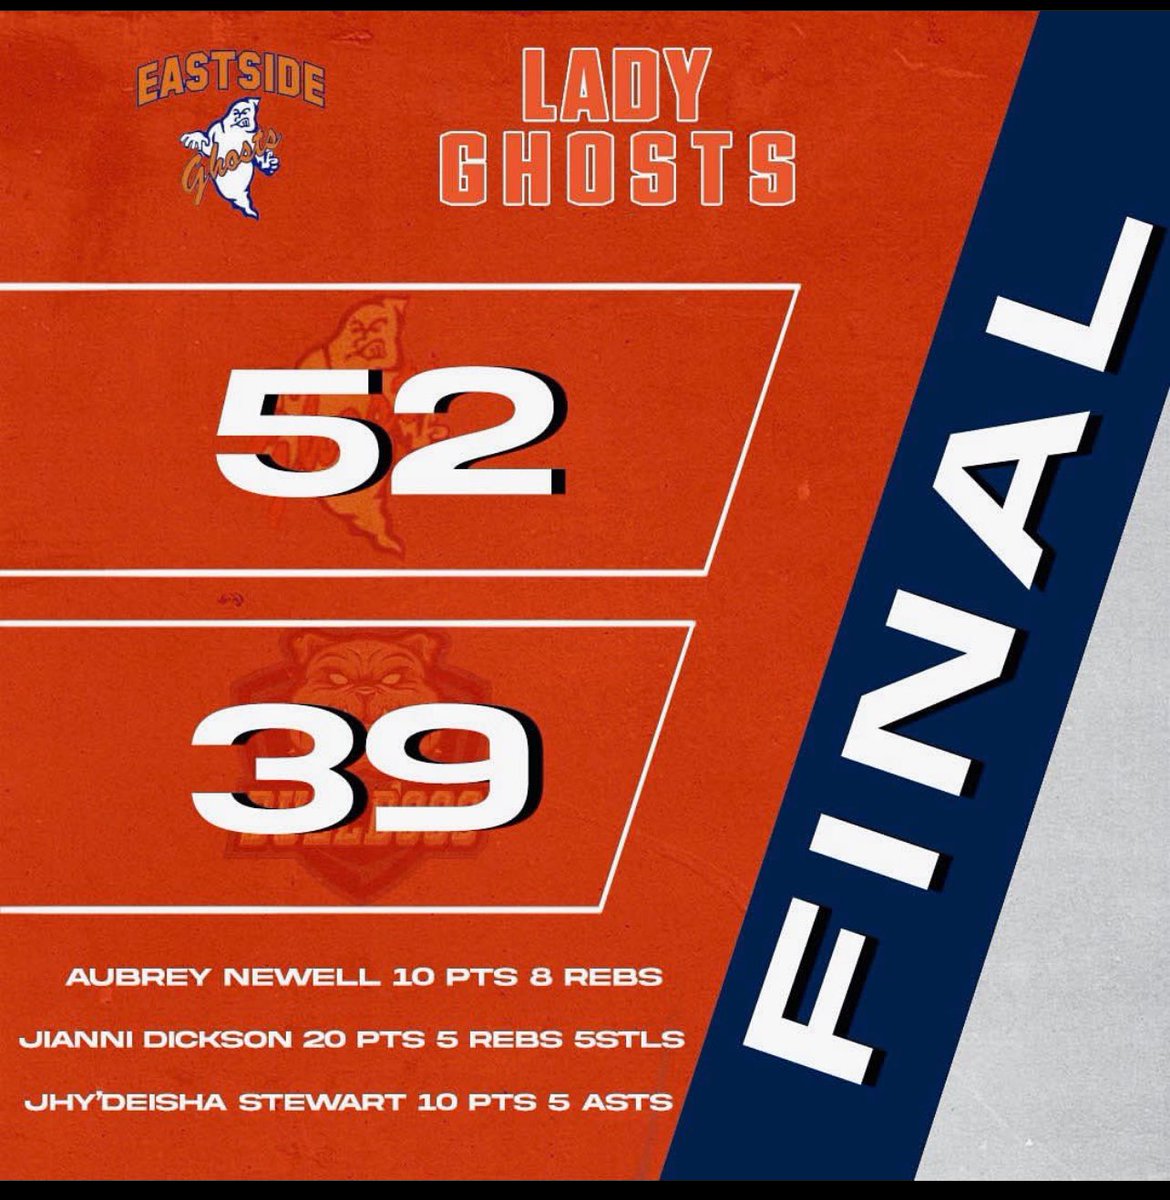 Final Score: Eastside 52 PCTI 39 Jianni Dickson scored 20 points, 5 rebounds, and 5 steals, Jhy’Deisha Stewart scored 10 points and added 5 assists, and Aubrey Newell Contributed 10 points & 8 rebounds!! #GlissonStrong💜 #JustUs #LLR🕊️